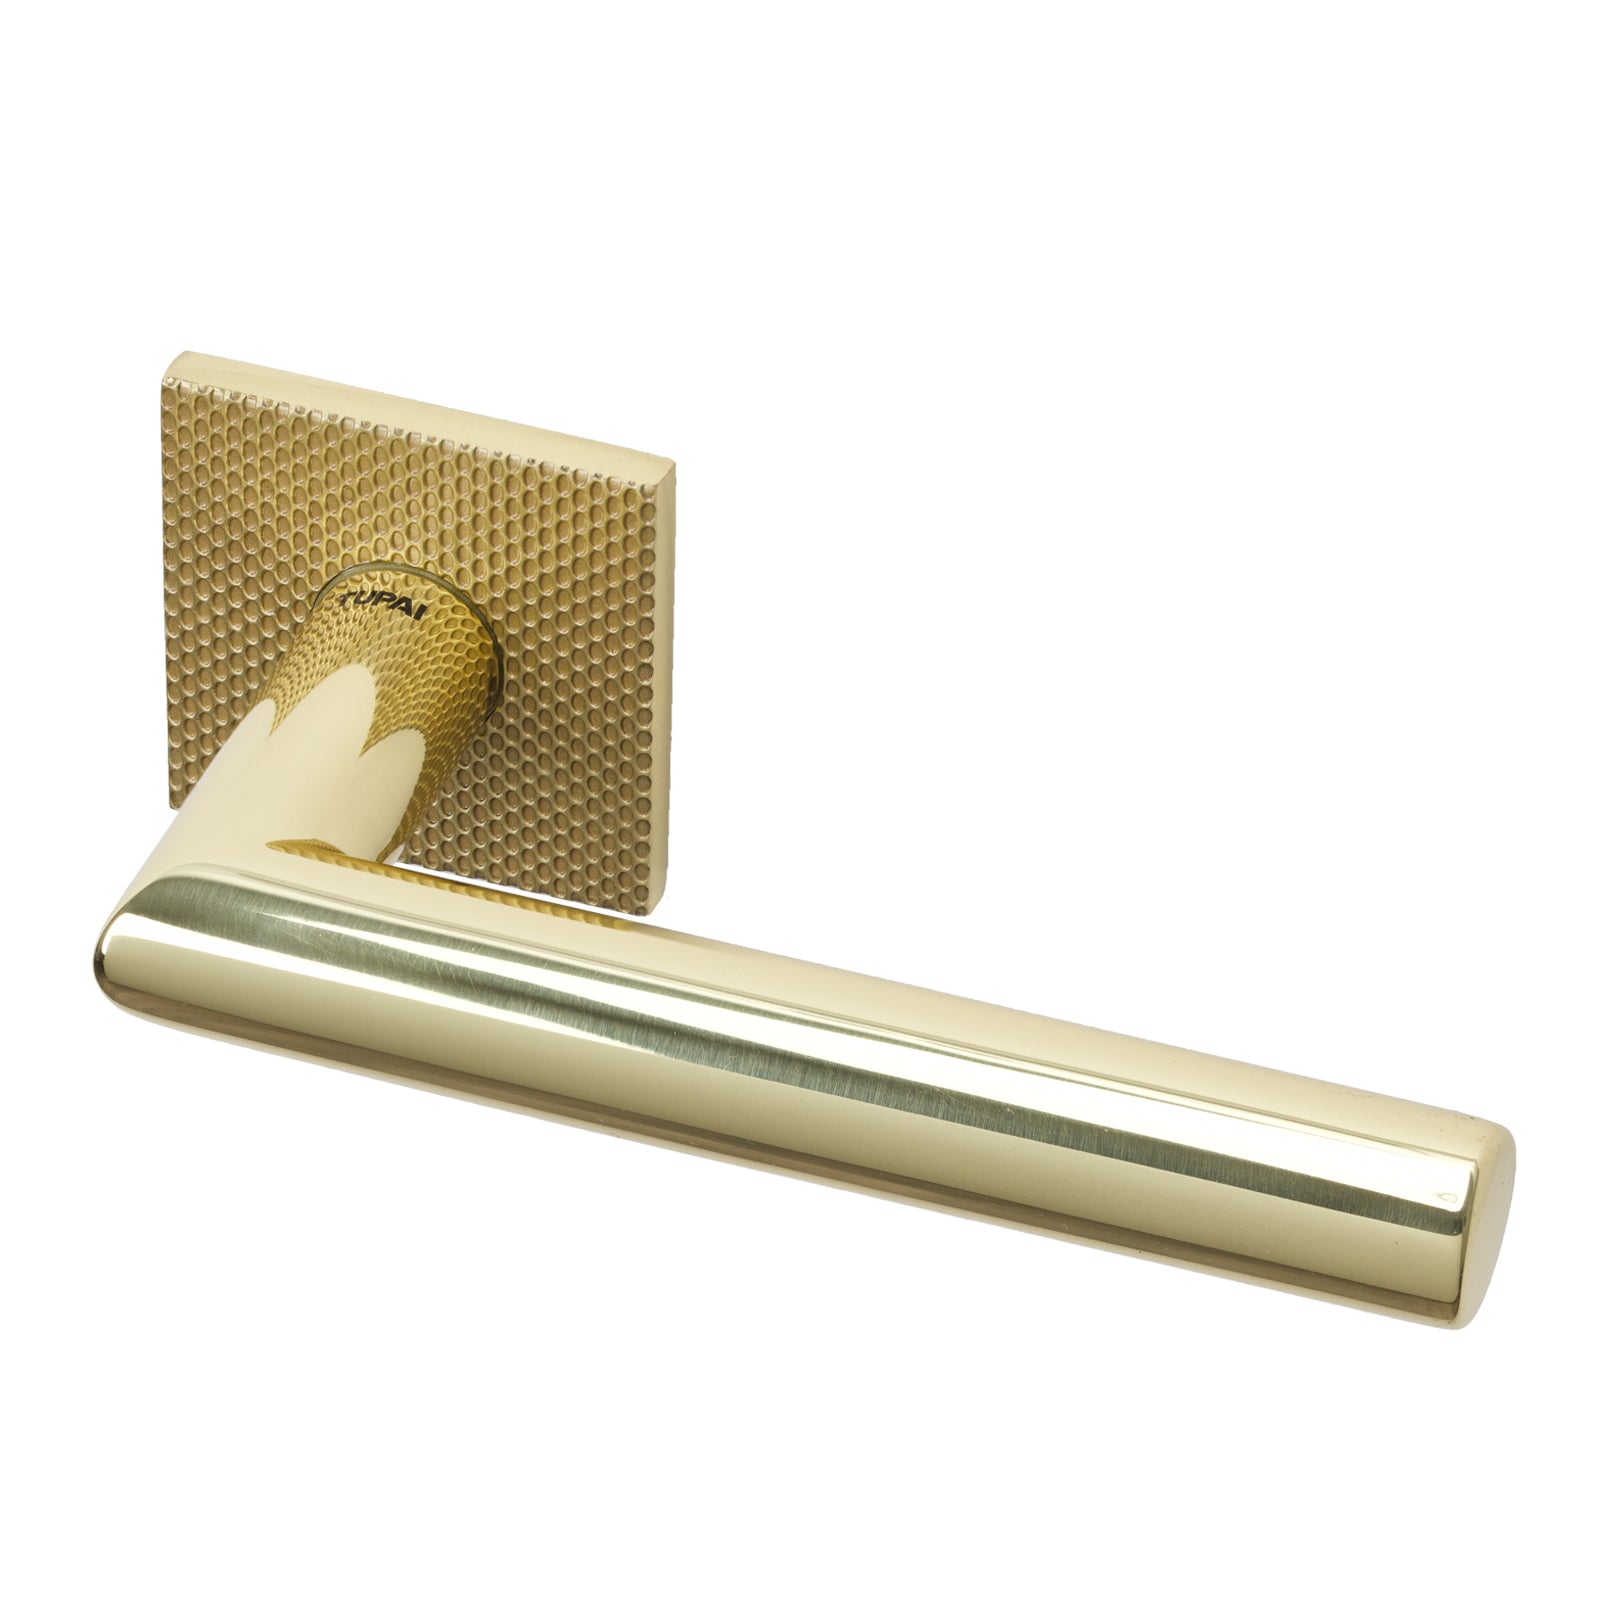 Larouco Waterfall Texture Lever on Rose Door Handle in Polished Brass Finish SHOW